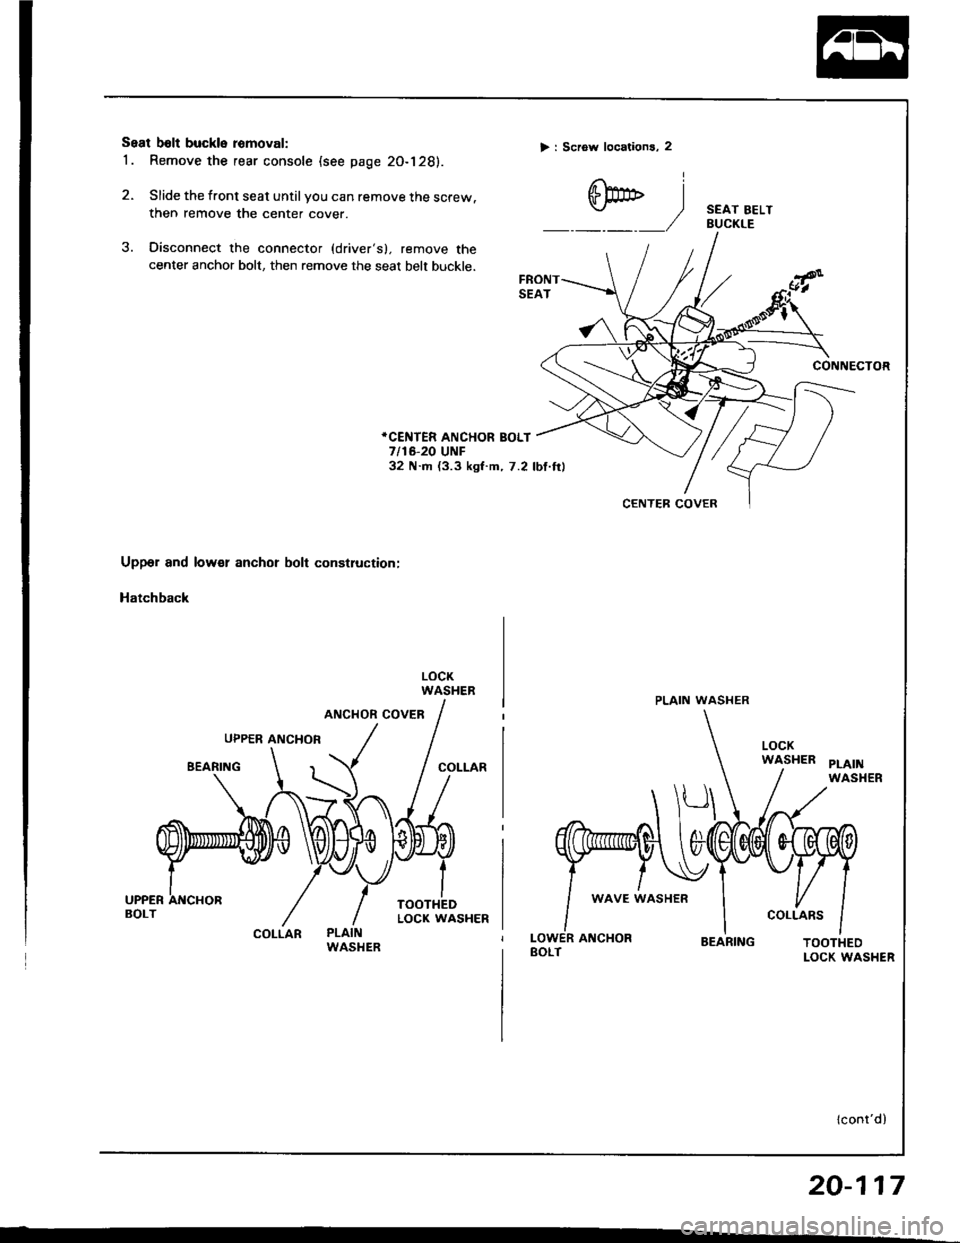 HONDA INTEGRA 1994 4.G Workshop Manual Seal b6lt buckle romoval:
1 . Remove the rear console (see page 20-128).
2. Slide the front seat until you can remove the screw.
then remove the center cover.
3. Oisconnect the connector (drivers), r